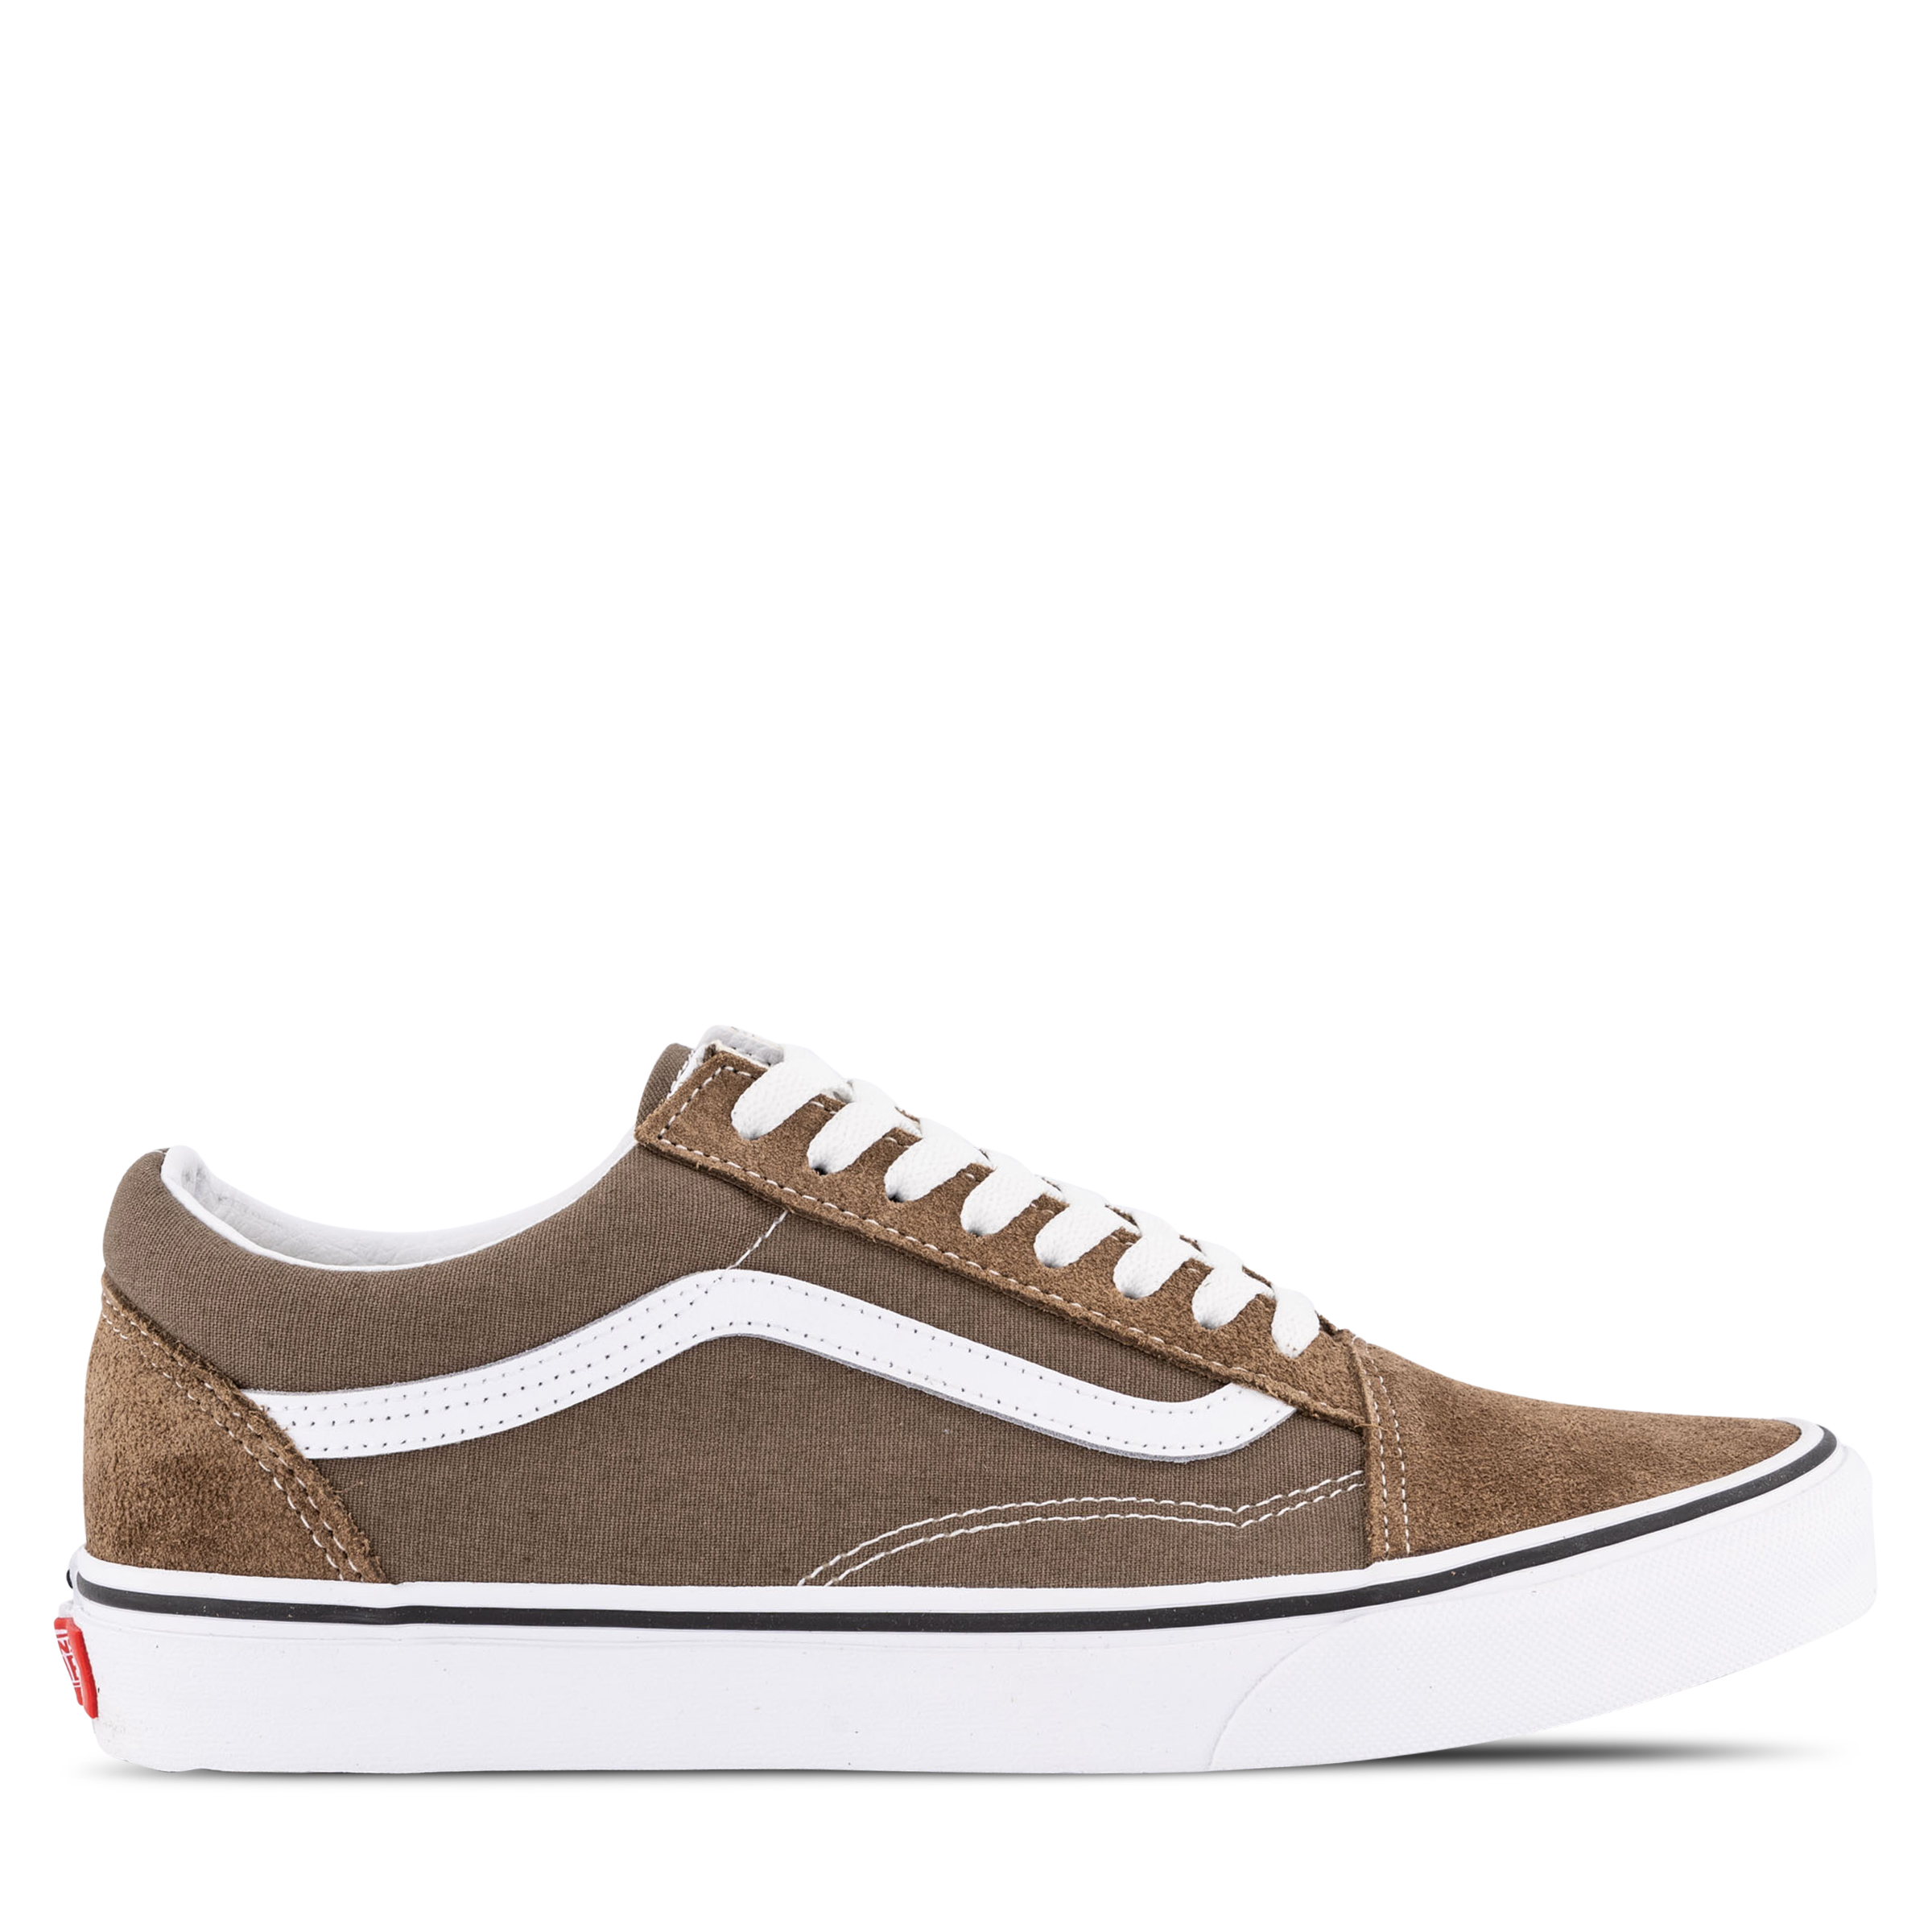 Vans Old Skool Colour Theory Colour Theory Walnut | Hype DC